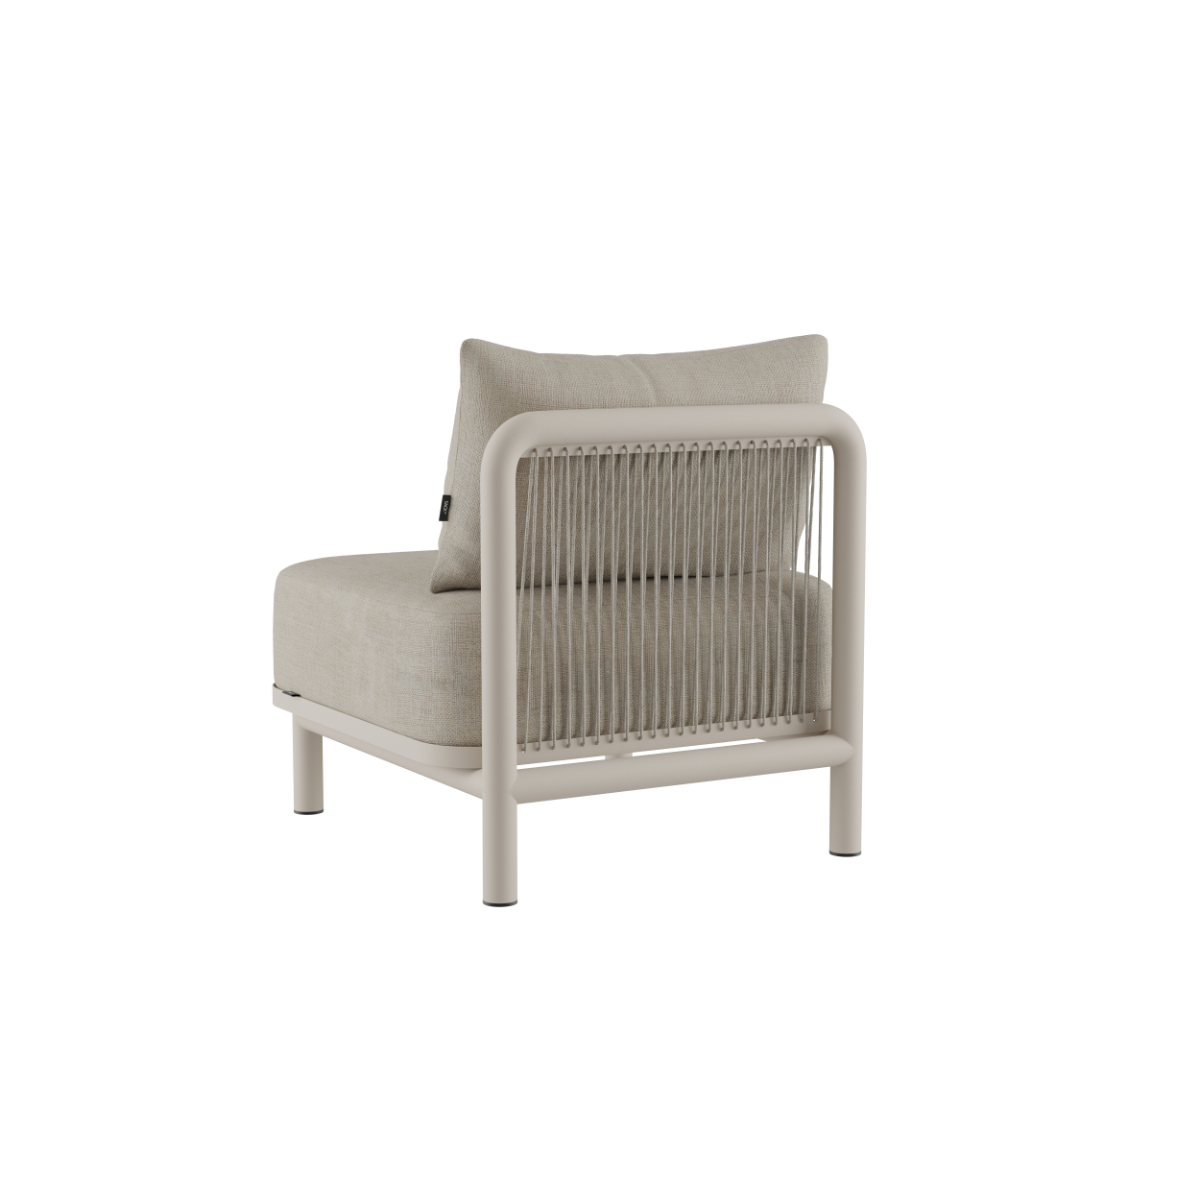 String Lounge Sofa - Seat section [Contract]